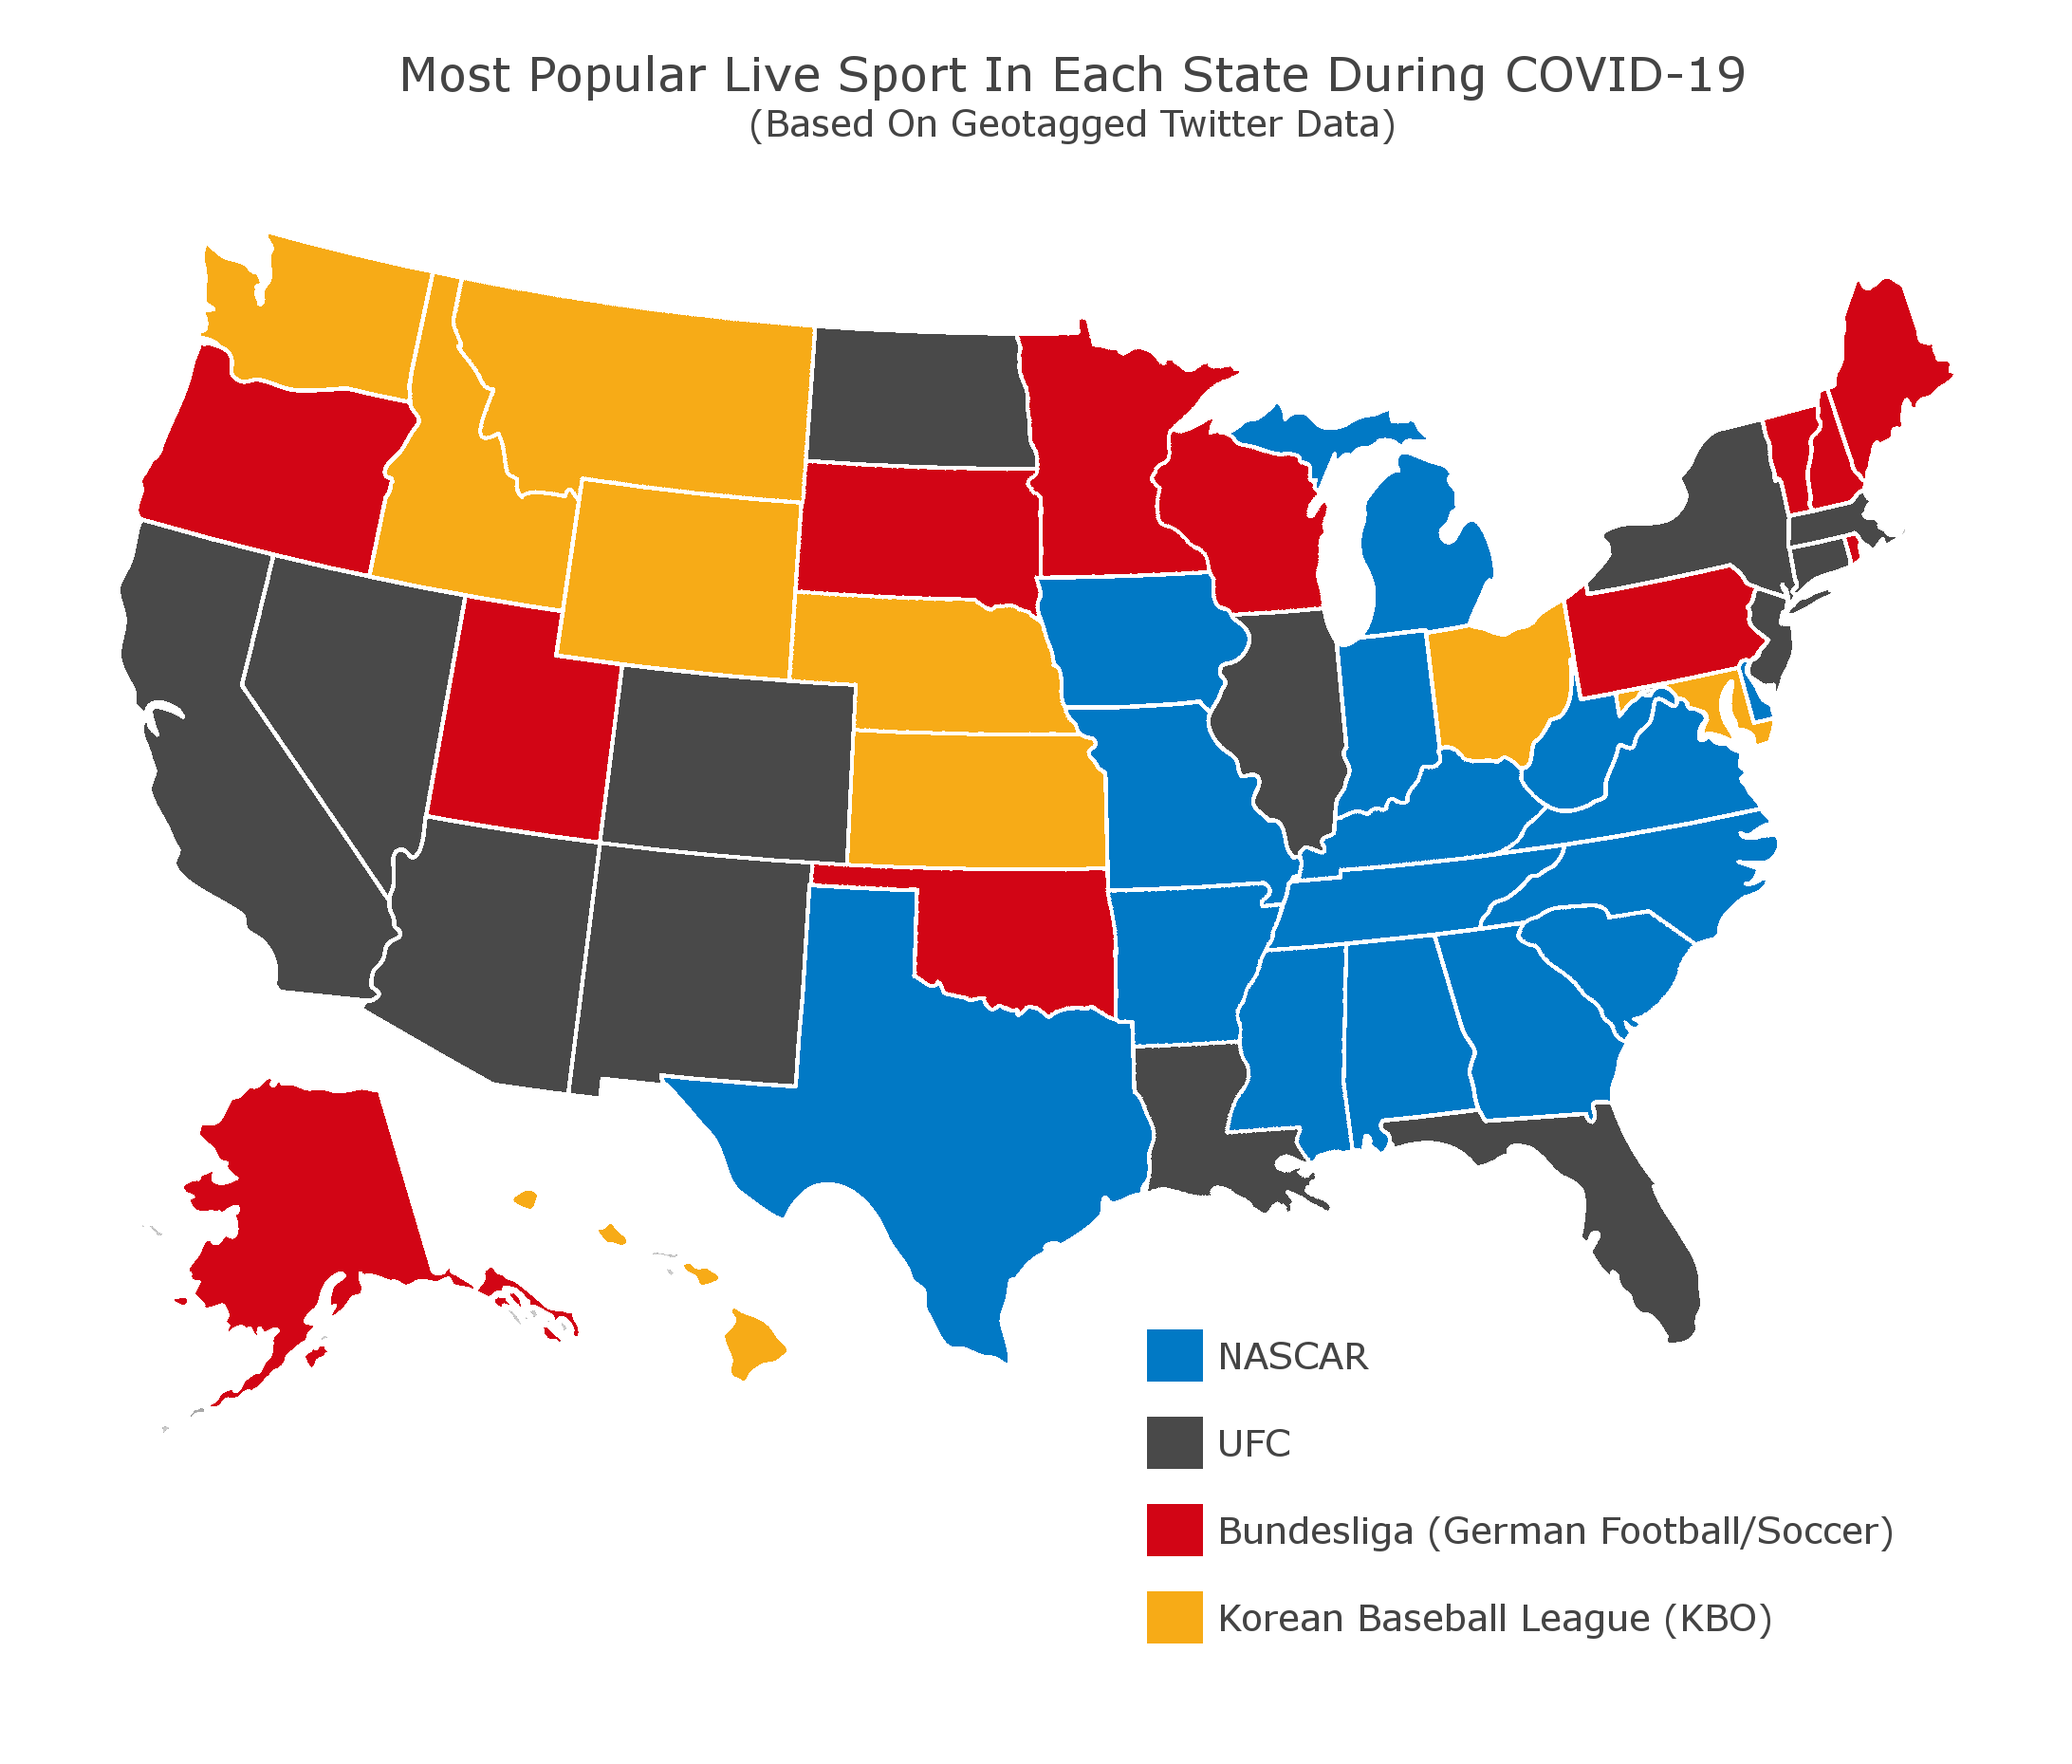 Most Popular Show in Every State During Coronavirus